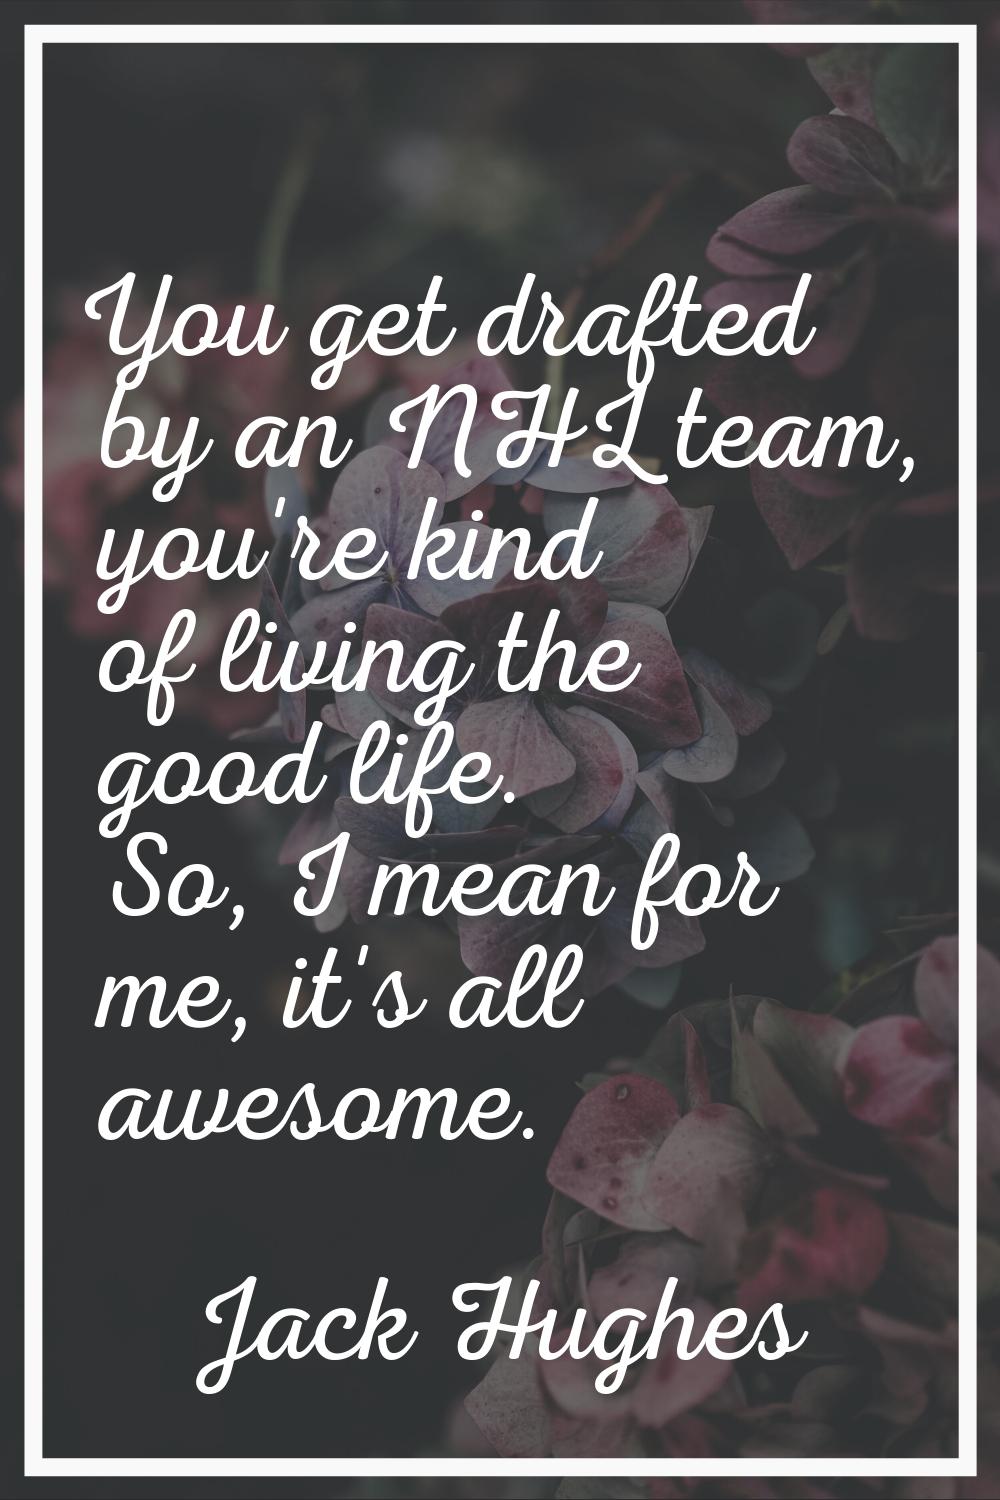 You get drafted by an NHL team, you're kind of living the good life. So, I mean for me, it's all aw